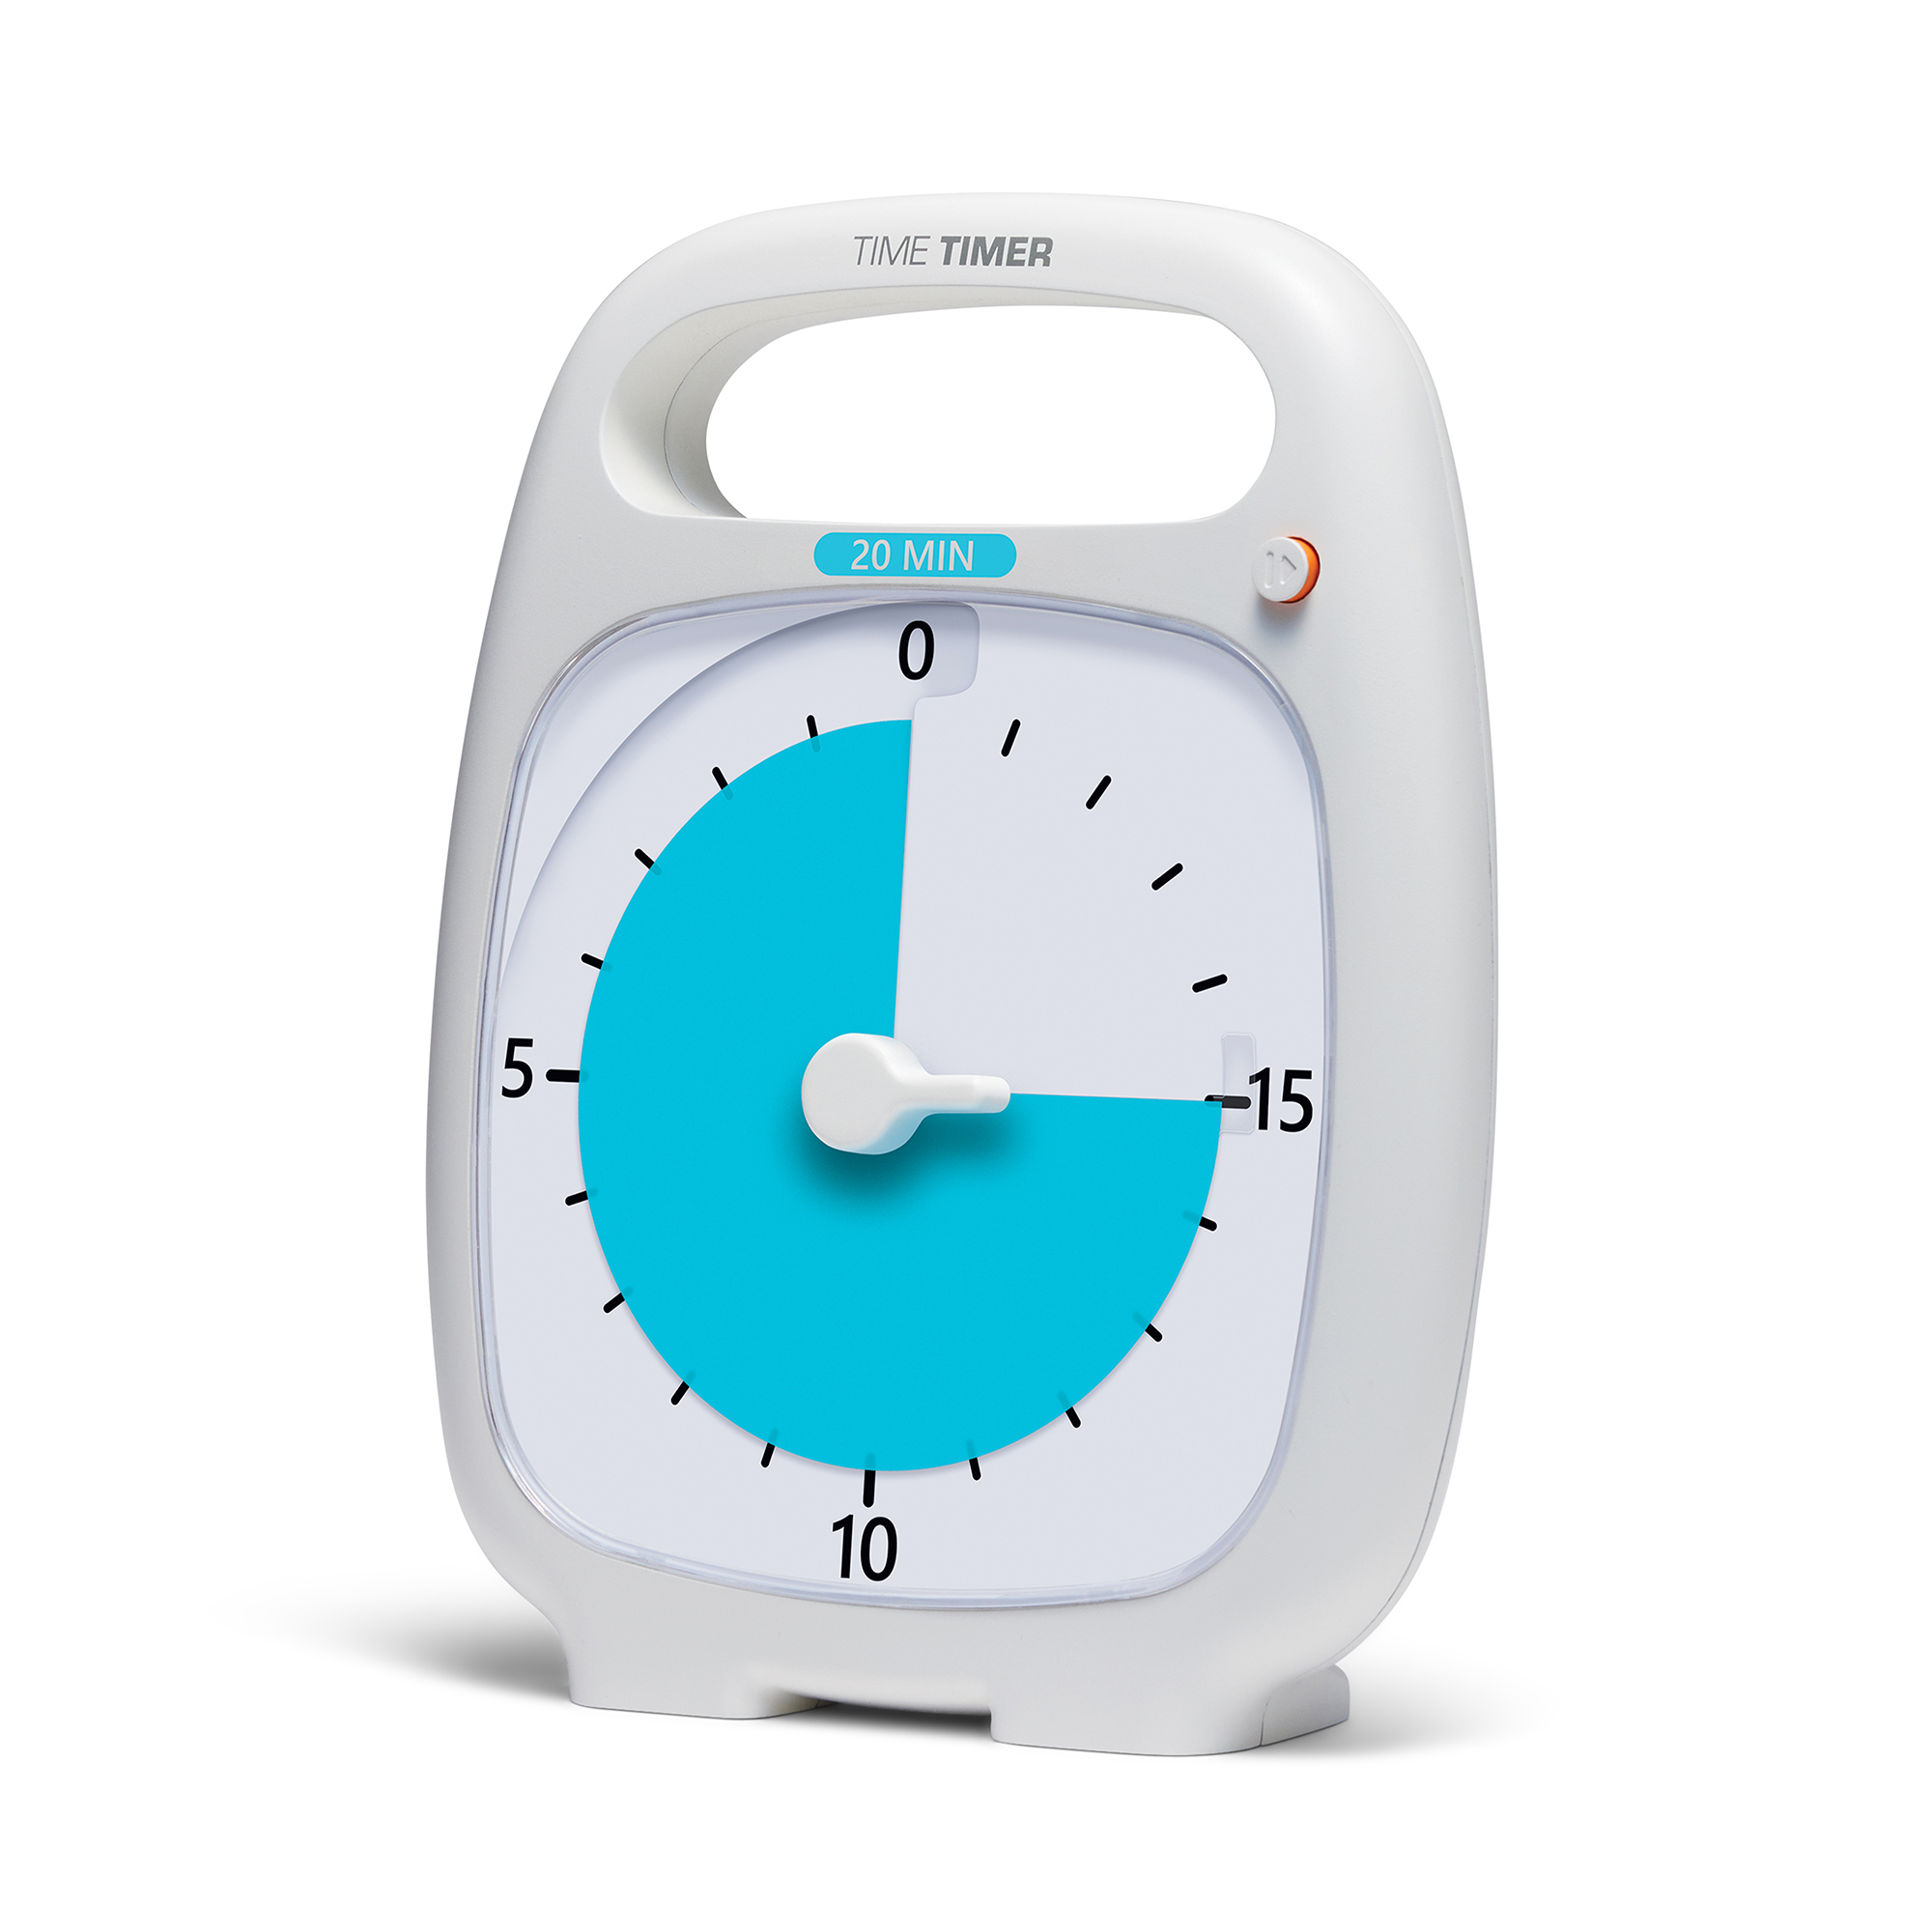 Time Timer® PLUS - 20 minutes